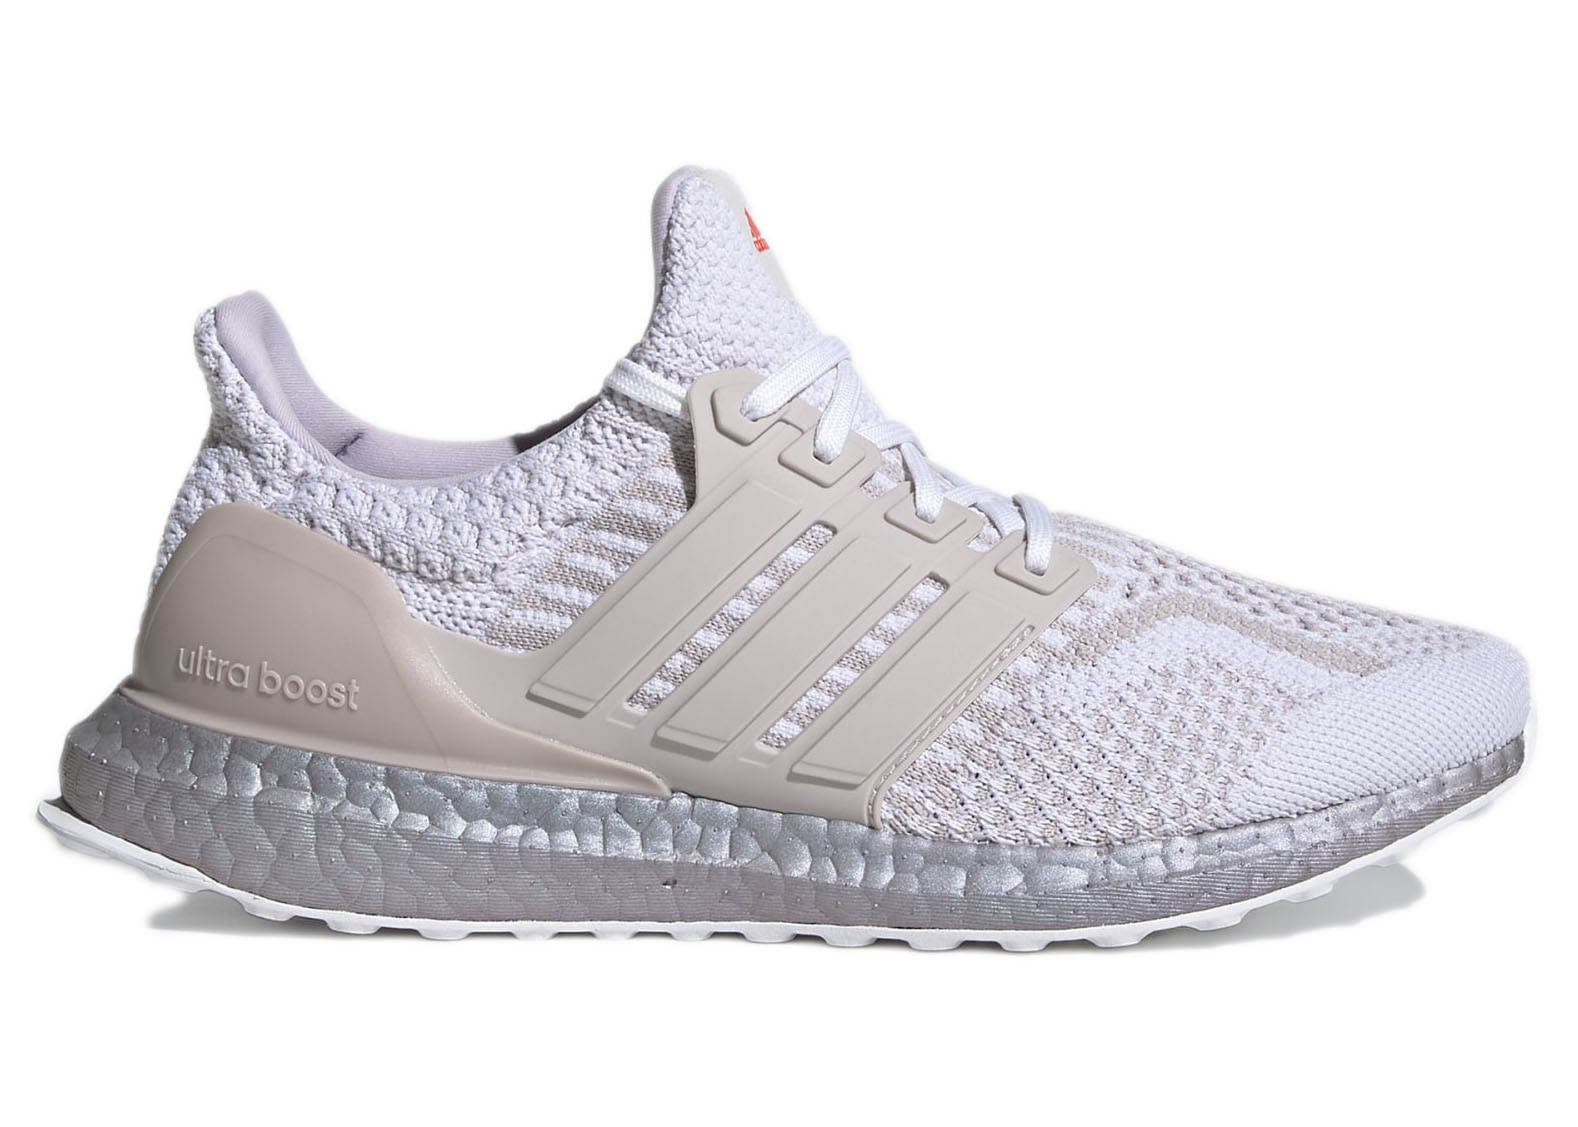 adidas Ultra Boost 5.0 DNA White Almost Pink Polka Dot (Women's)